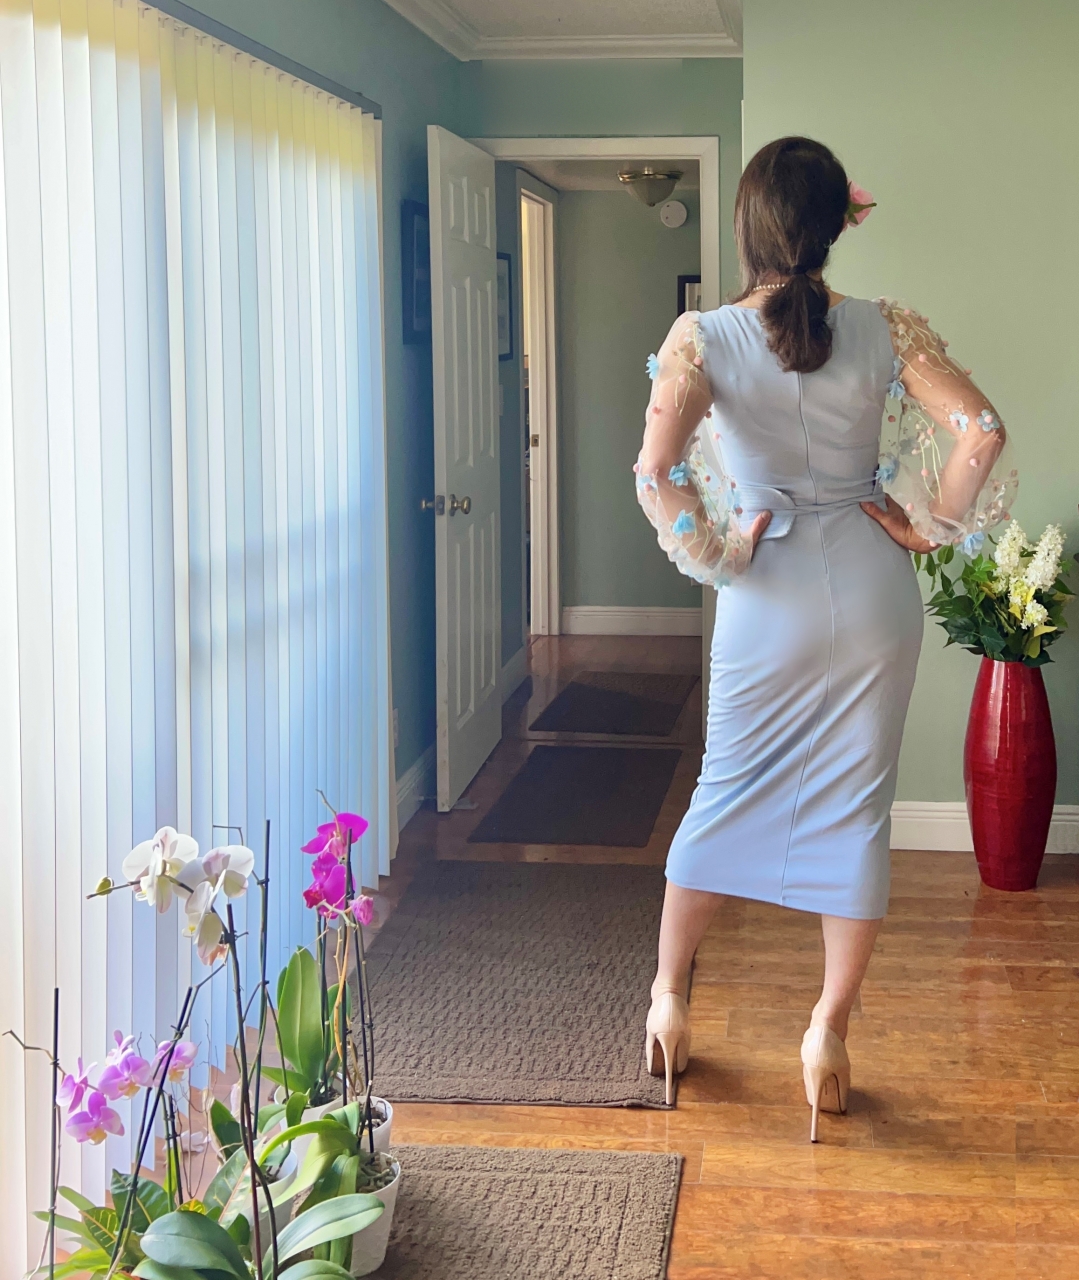 Florals, Pastels, Orchids, Hydrangeas, Pretty Dress and Heels. I LOVE this outfit! My hair is...